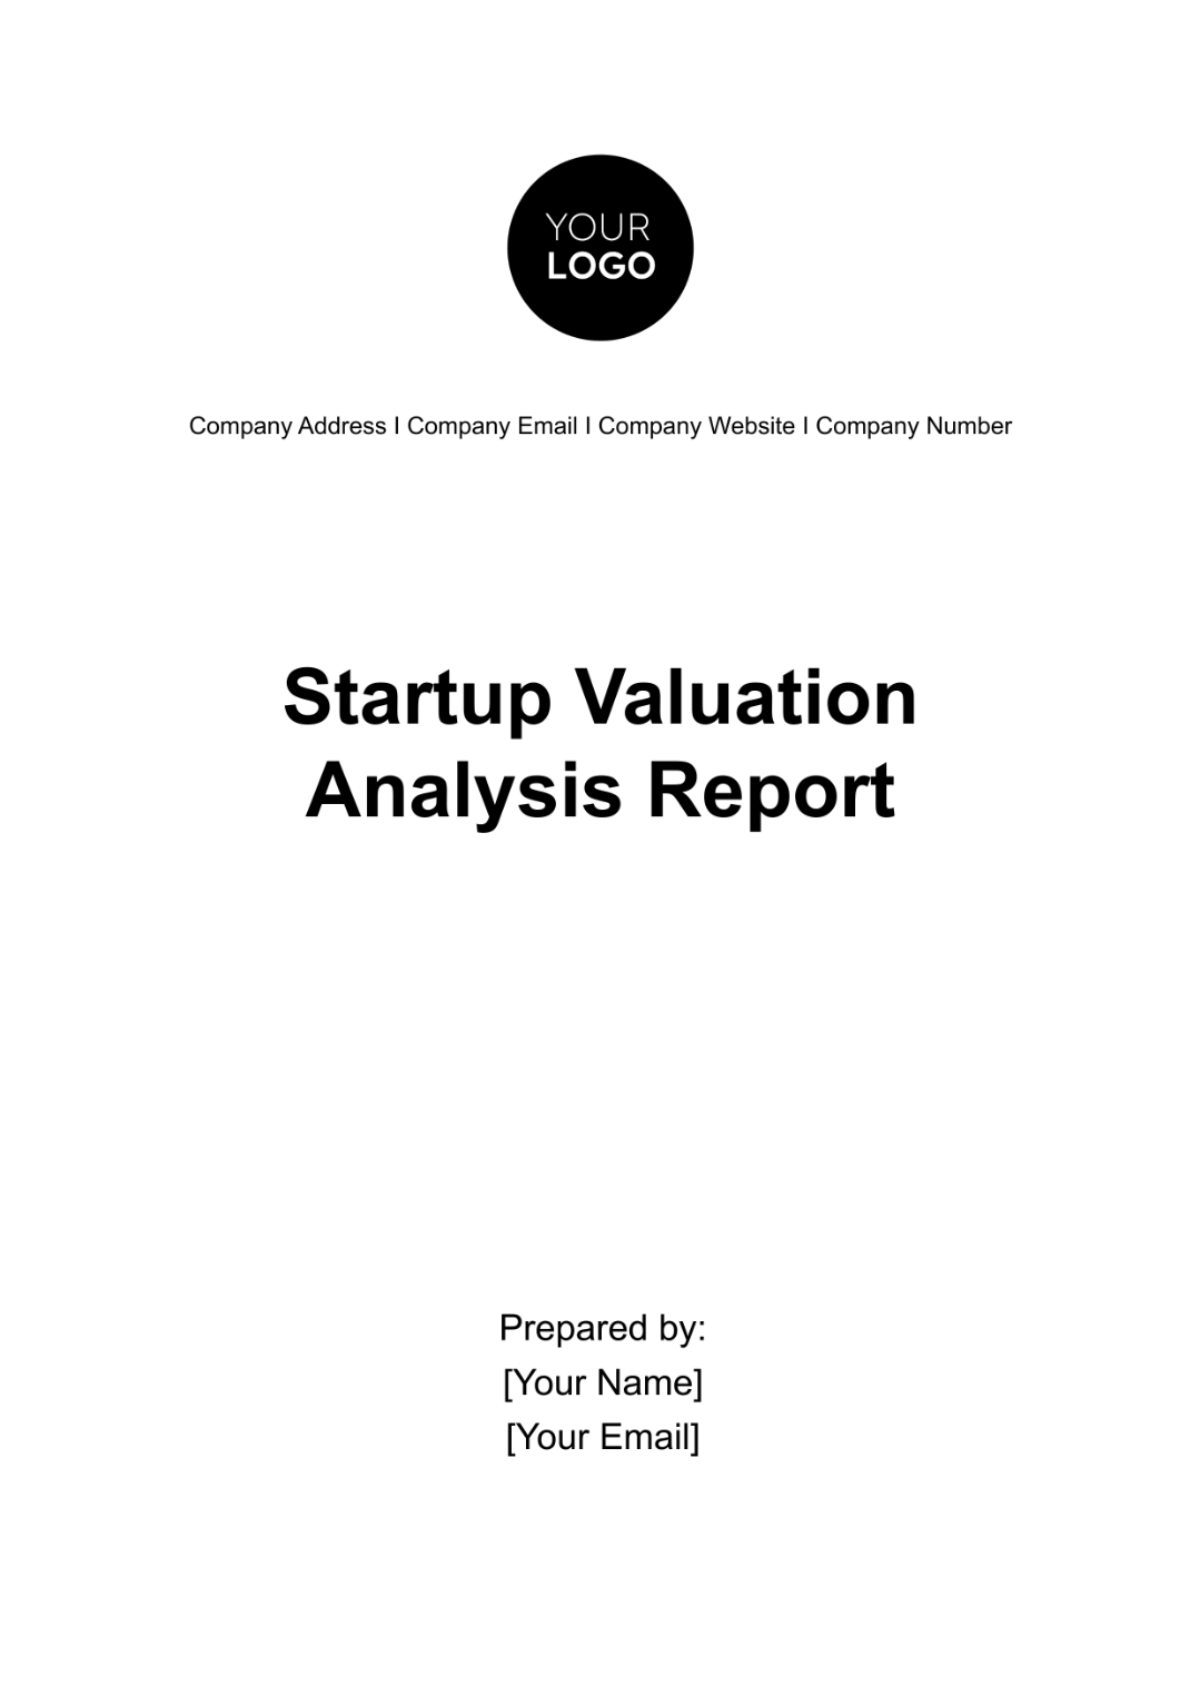 Startup Valuation Analysis Report Template